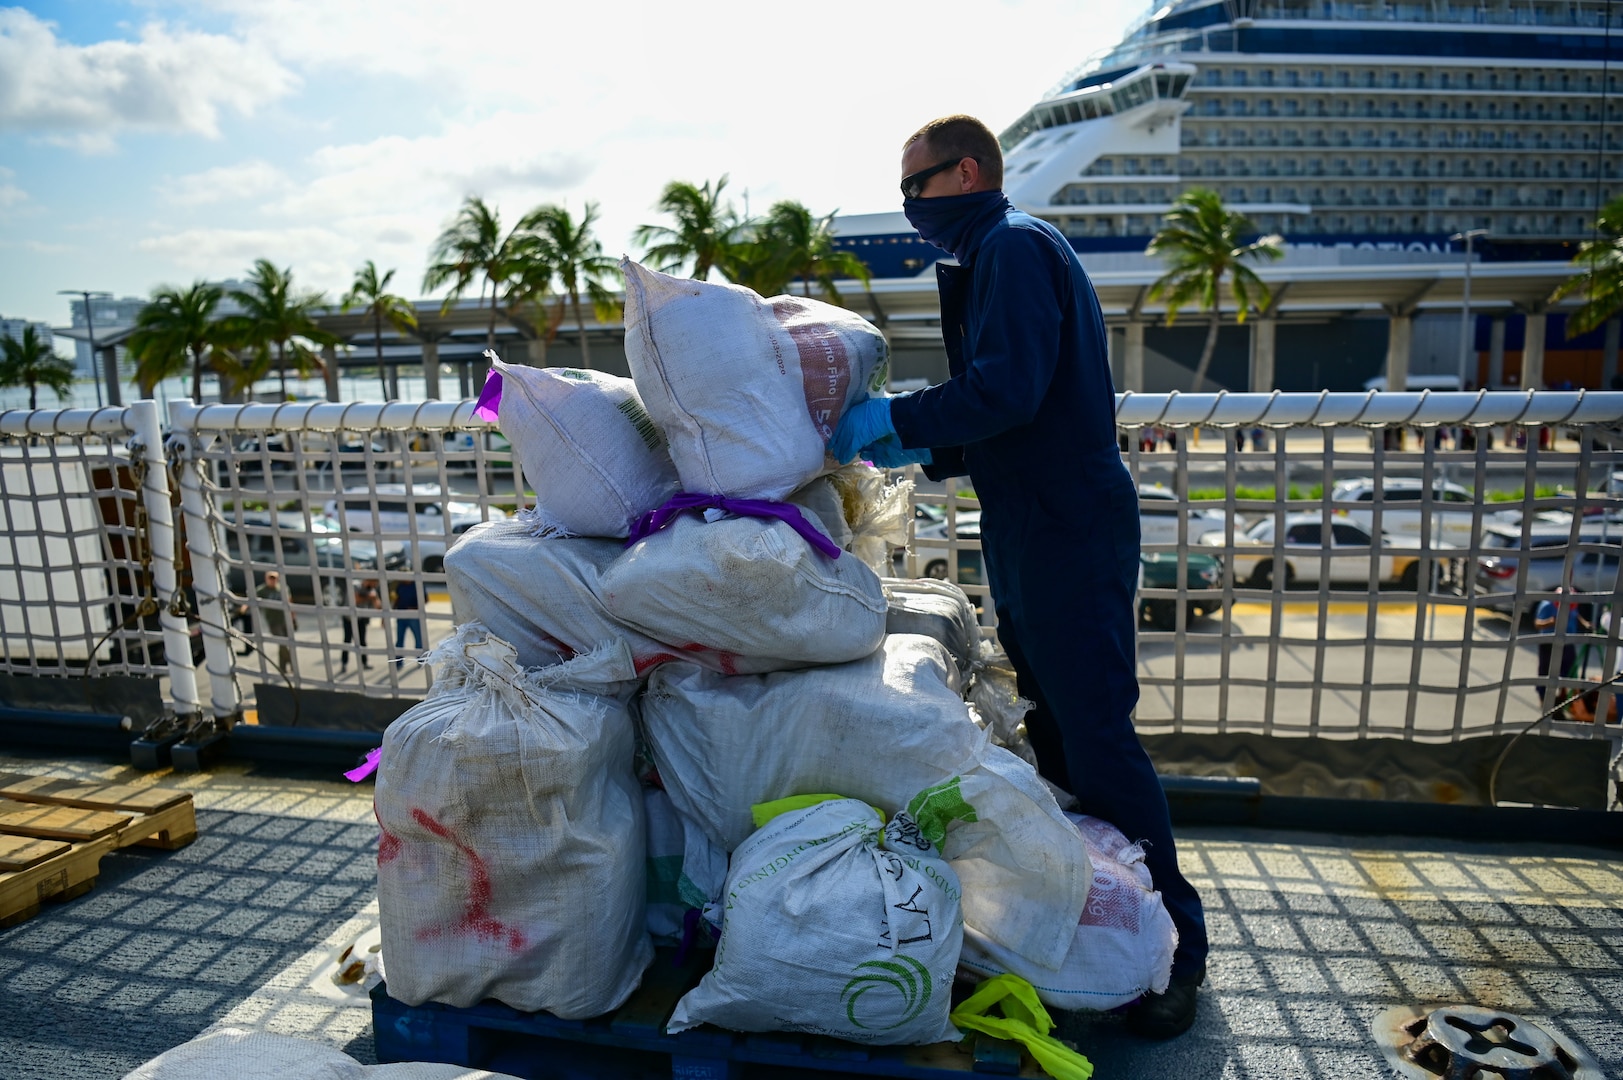 A USCGC Mohawk (WMEC 913) crew member stacks bales of illegal narcotics on the flight deck of the cutter